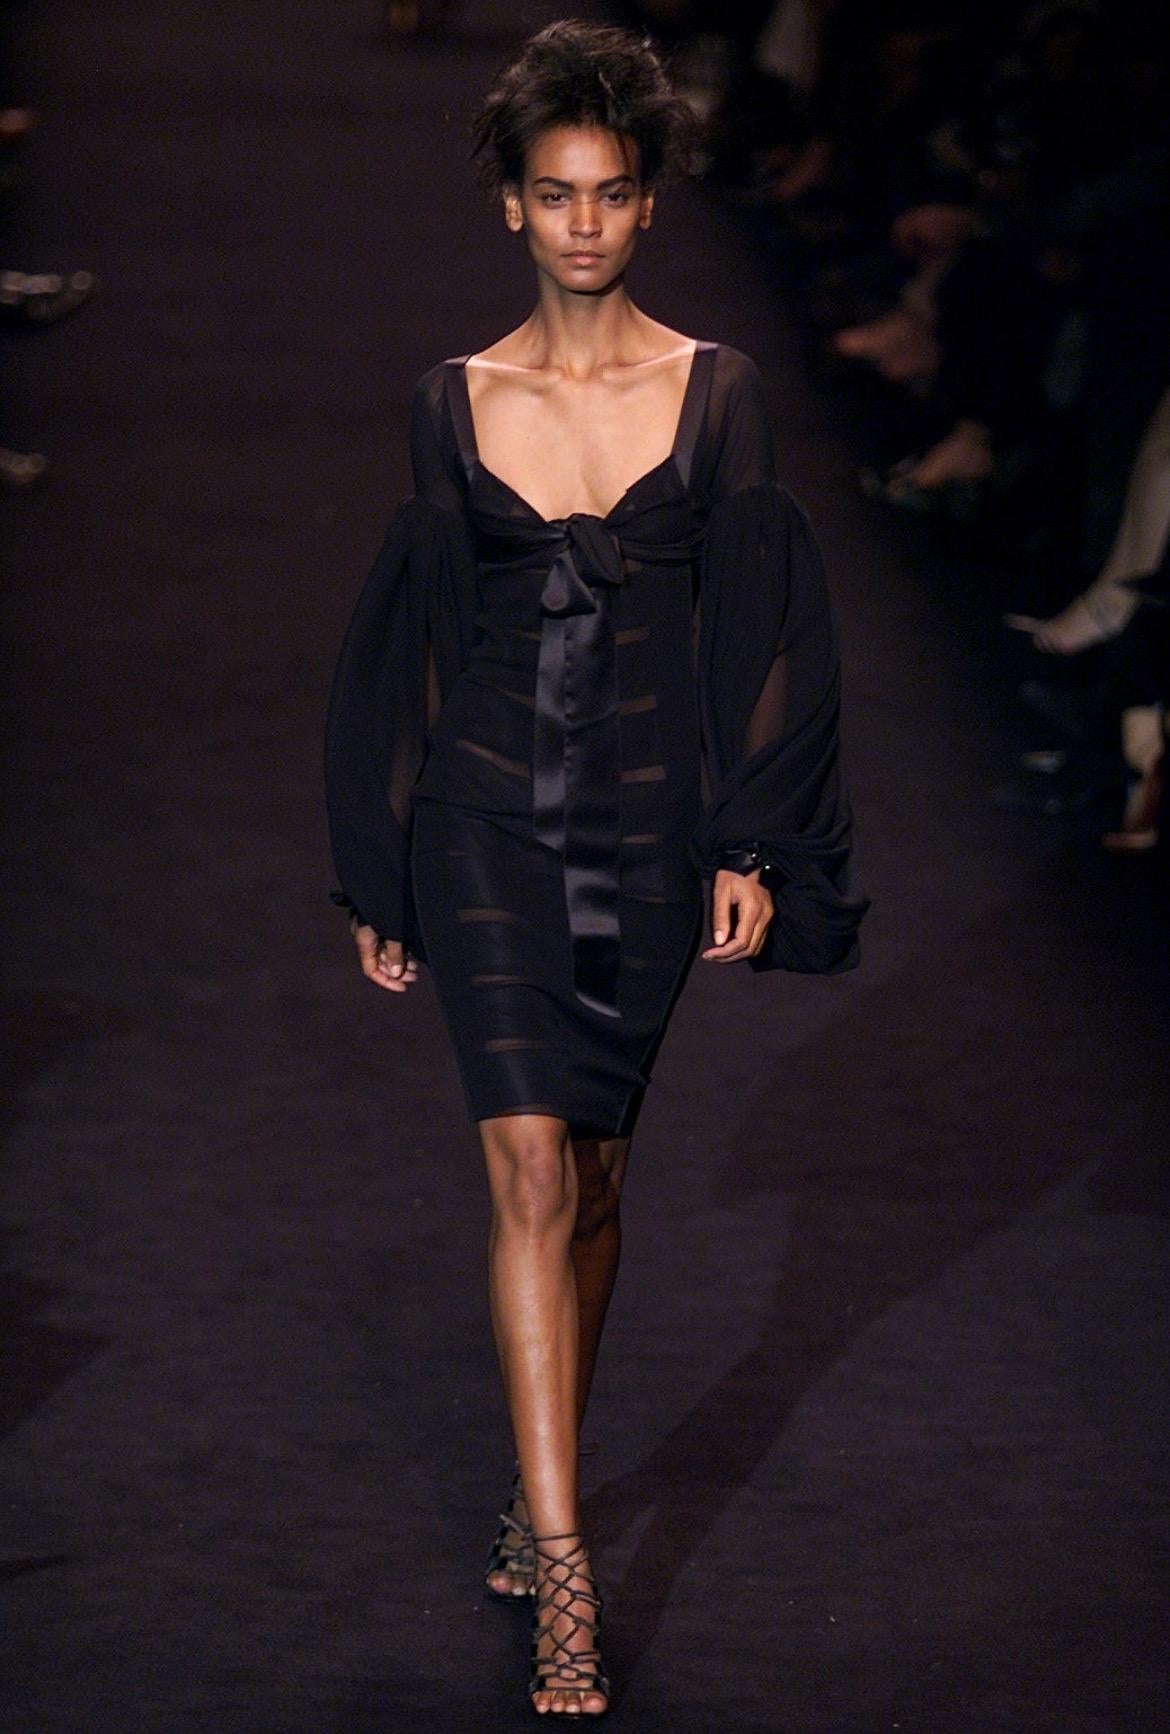 Presenting a gorgeous black sheer poet sleeve Yves Saint Laurent Rive Gauche dress, designed by Tom Ford. From the Fall/Winter 2002 collection, this dress debuted on the season's runway as look 37 modeled by Liya Kebede. This fabulous dress features